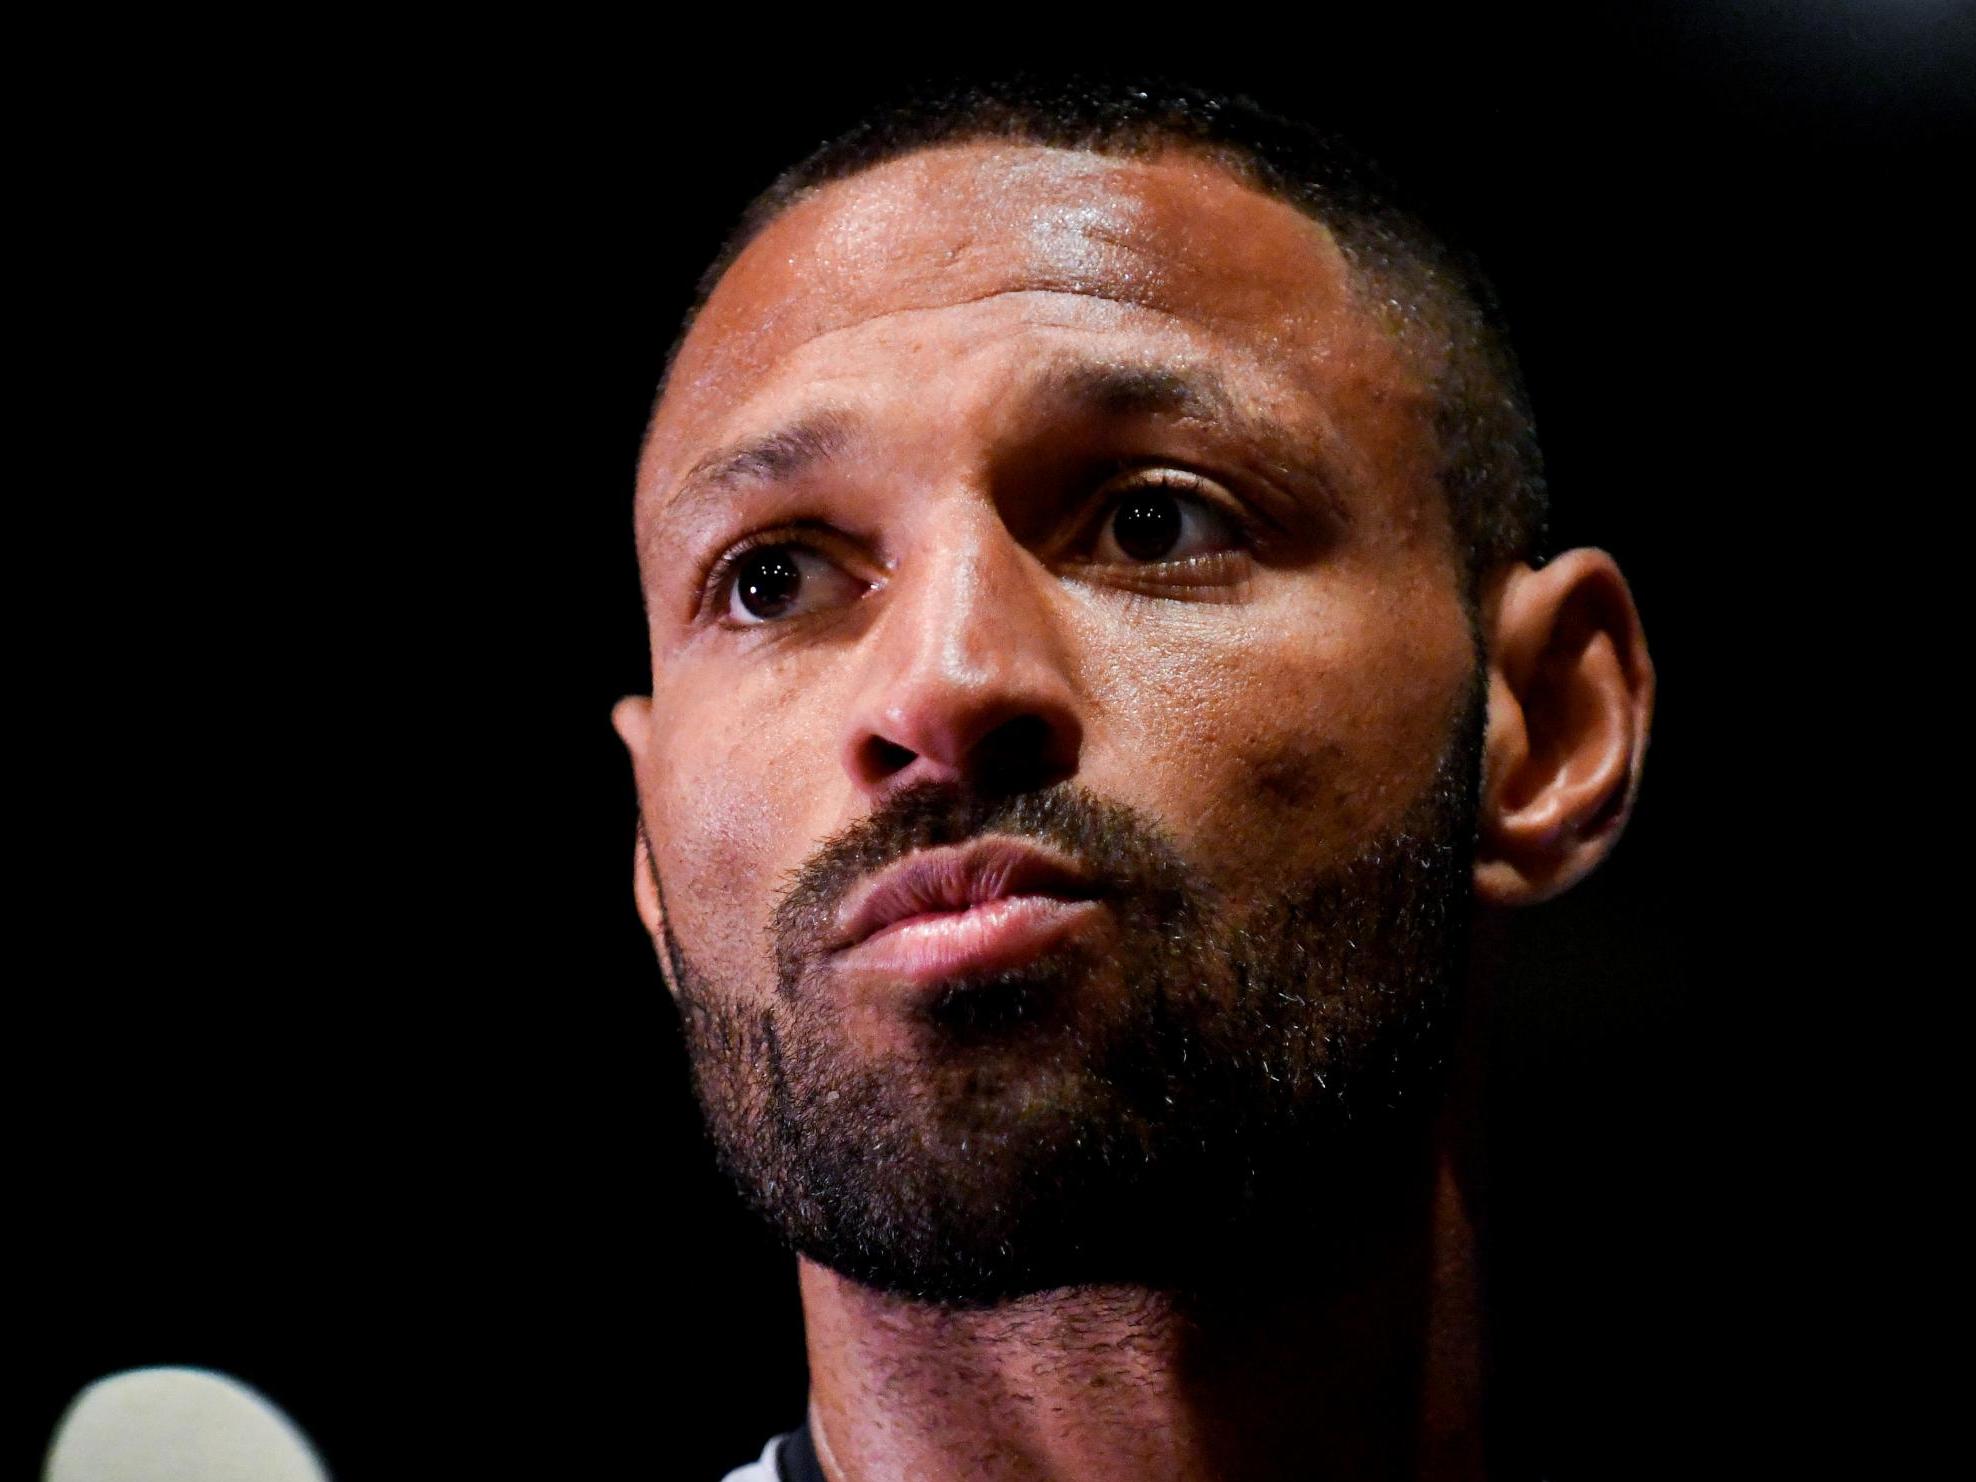 Kell Brook will return to the ring in February after more than a year out